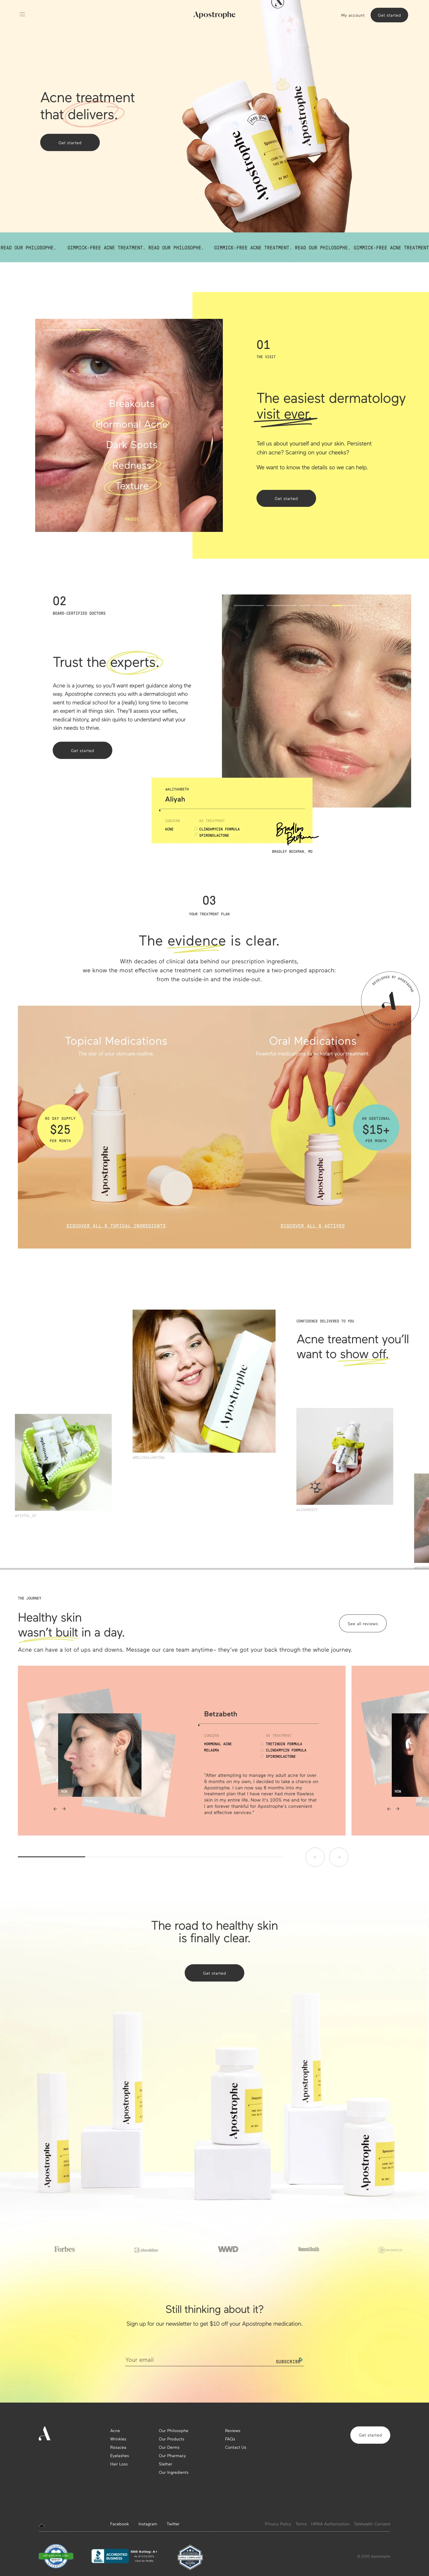 Apostrophe Landing Page Example: Get prescription treatment for your breakouts, scars, redness, and hyperpigmentation.